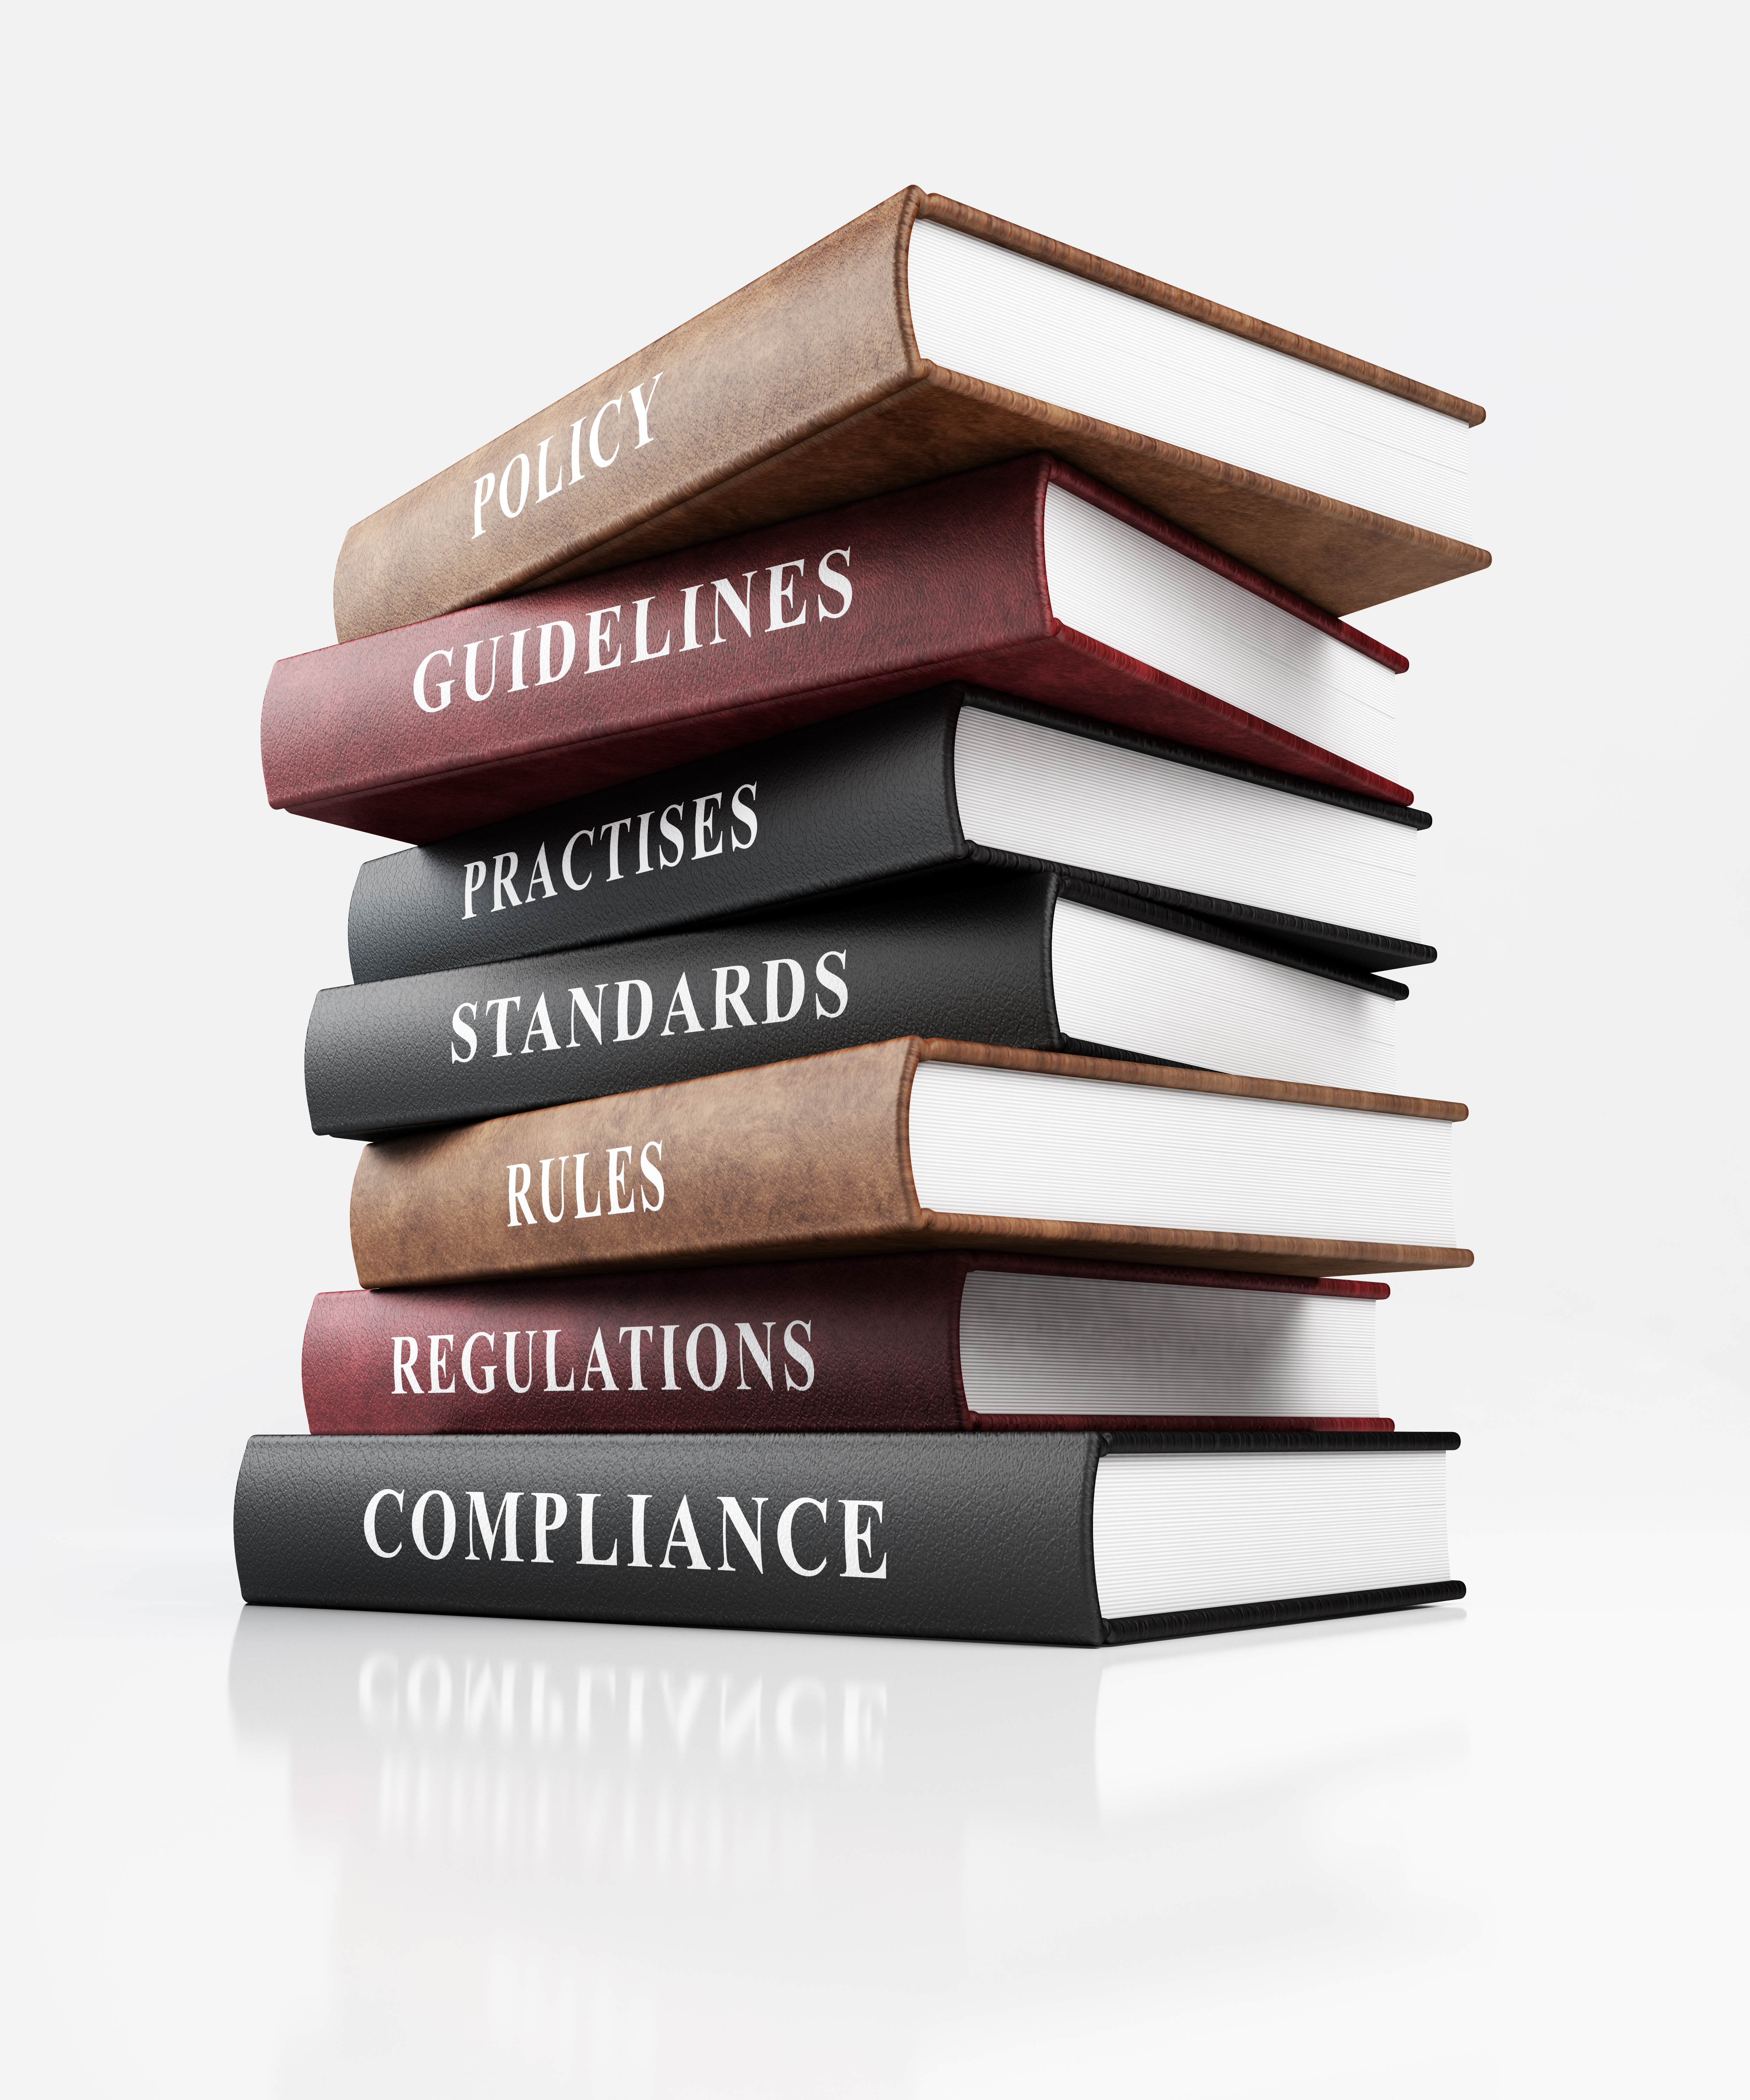 Leather covered book of compliance. Stack of books on top of each other with business words written on their spines. Isolated on white background with clipping path.